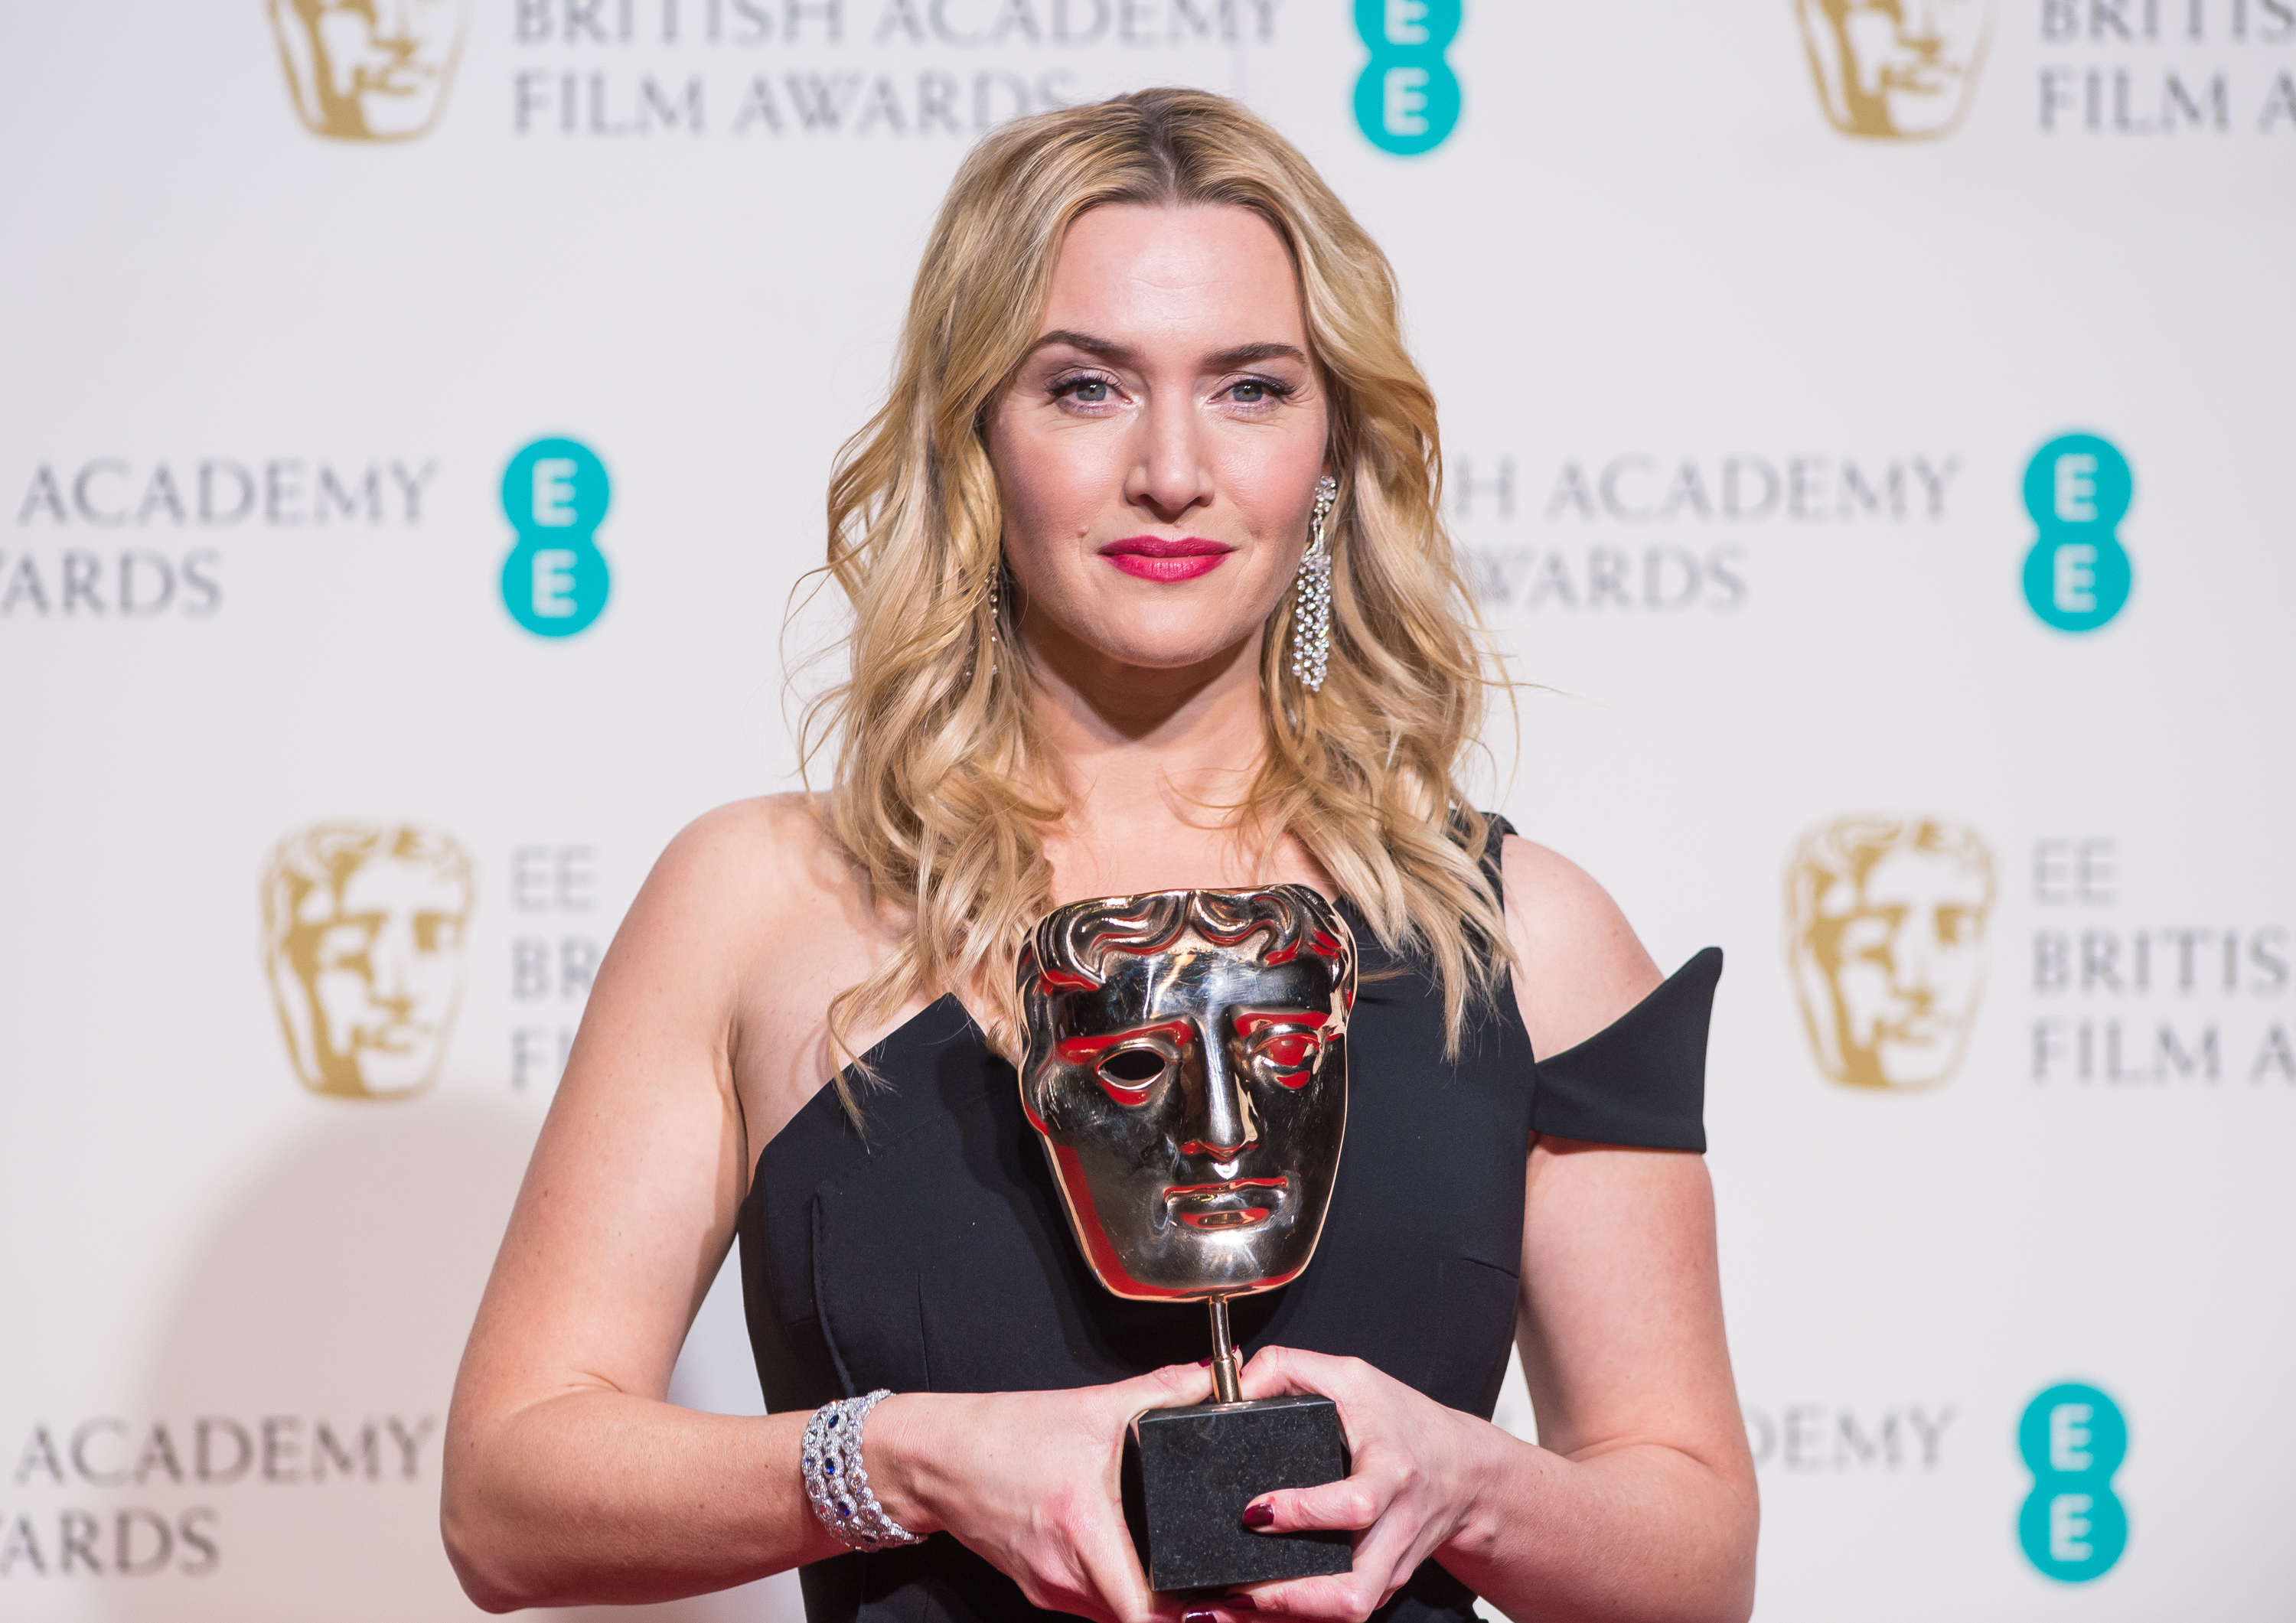 LONDON, ENGLAND - FEBRUARY 14: Kate Winslet poses in the winners room at the EE British Academy Film Awards at The Royal Opera House on February 14, 2016 in London, England. (Photo by Samir Hussein/WireImage)